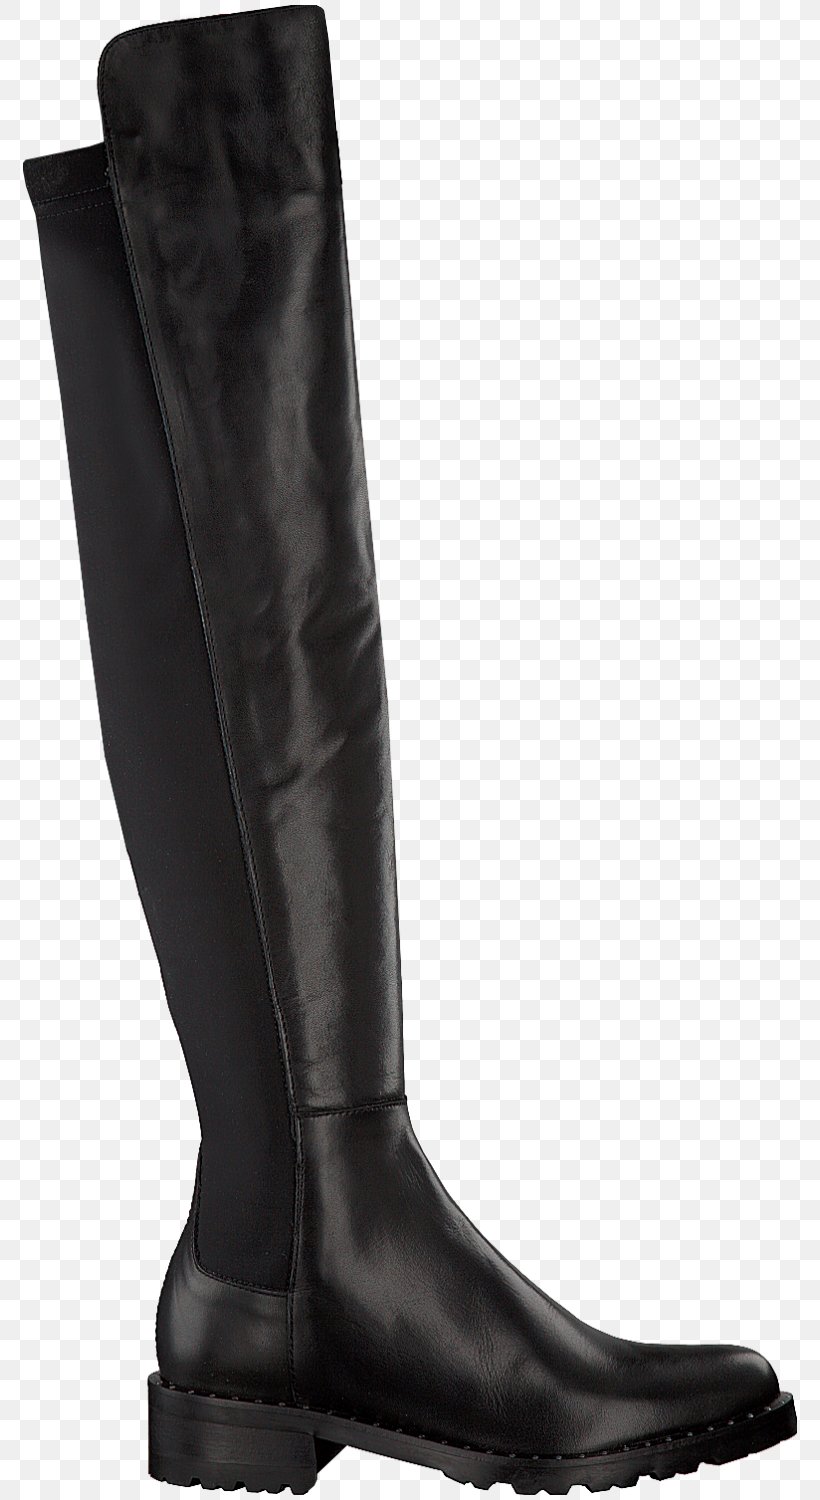 Riding Boot Shoe Leather Footwear, PNG, 784x1500px, Boot, Adidas, Adidas Originals, Black, Footwear Download Free